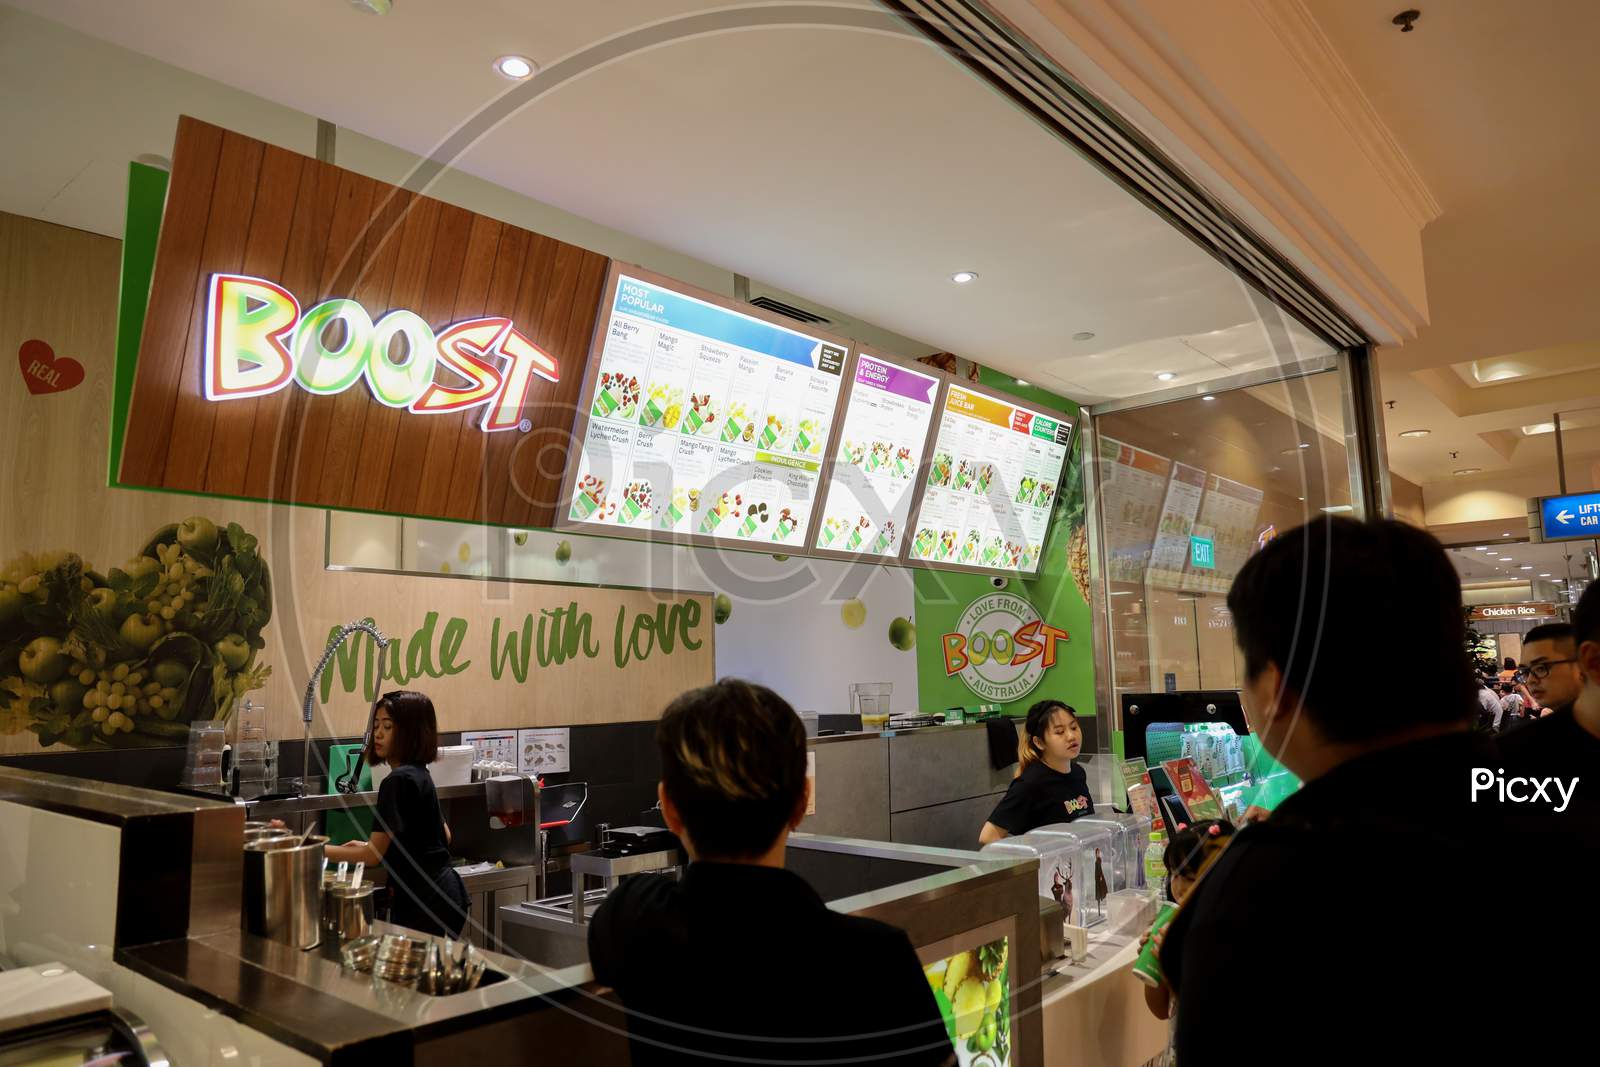 Boost Restaurant  or Food Joint In Singapore